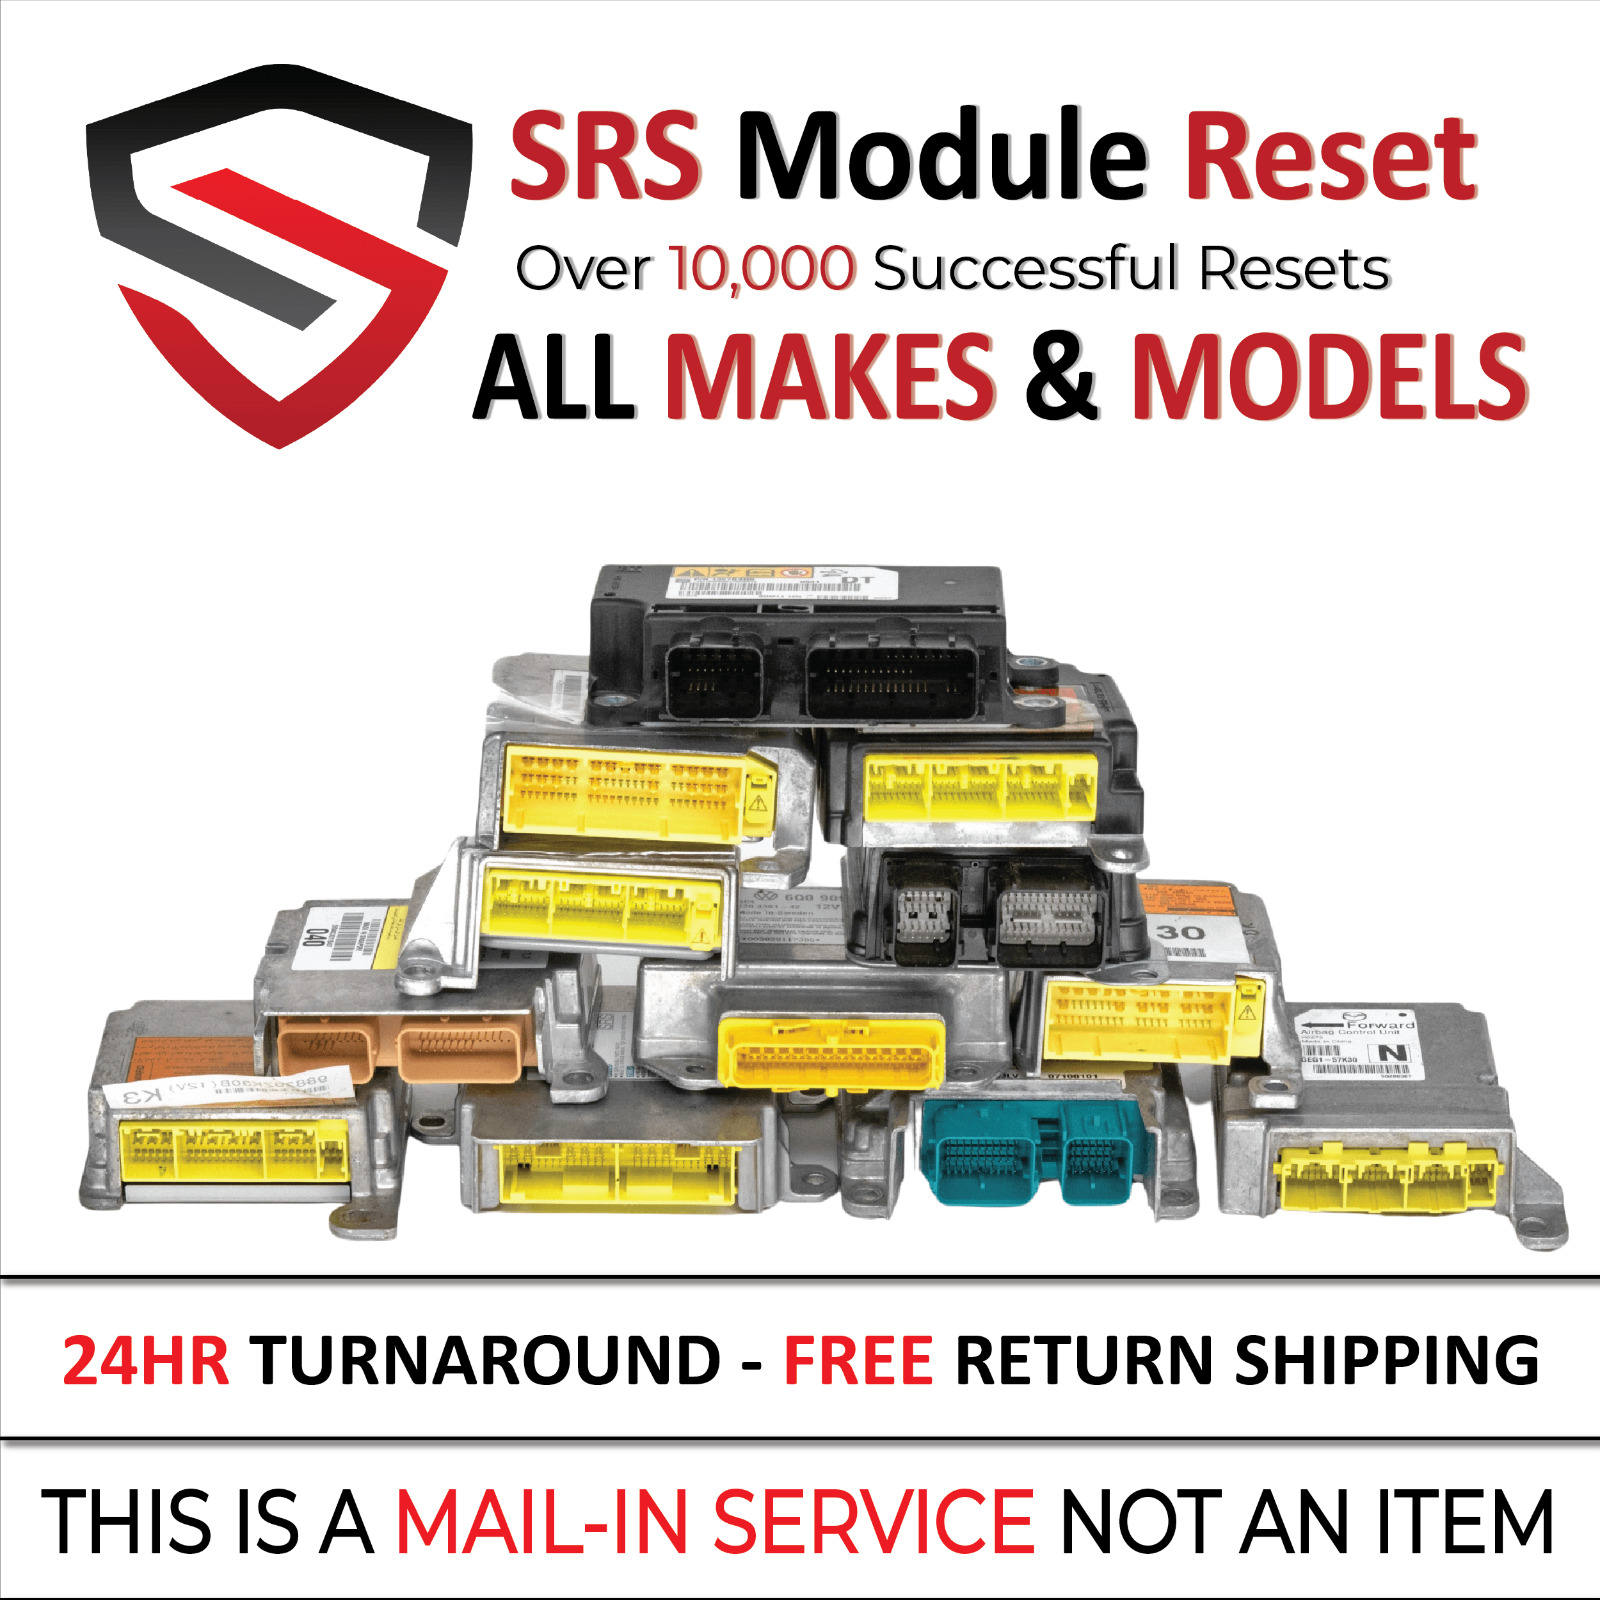 For Volkswagen SRS Module Reset Service - Guaranteed or Your Money Back